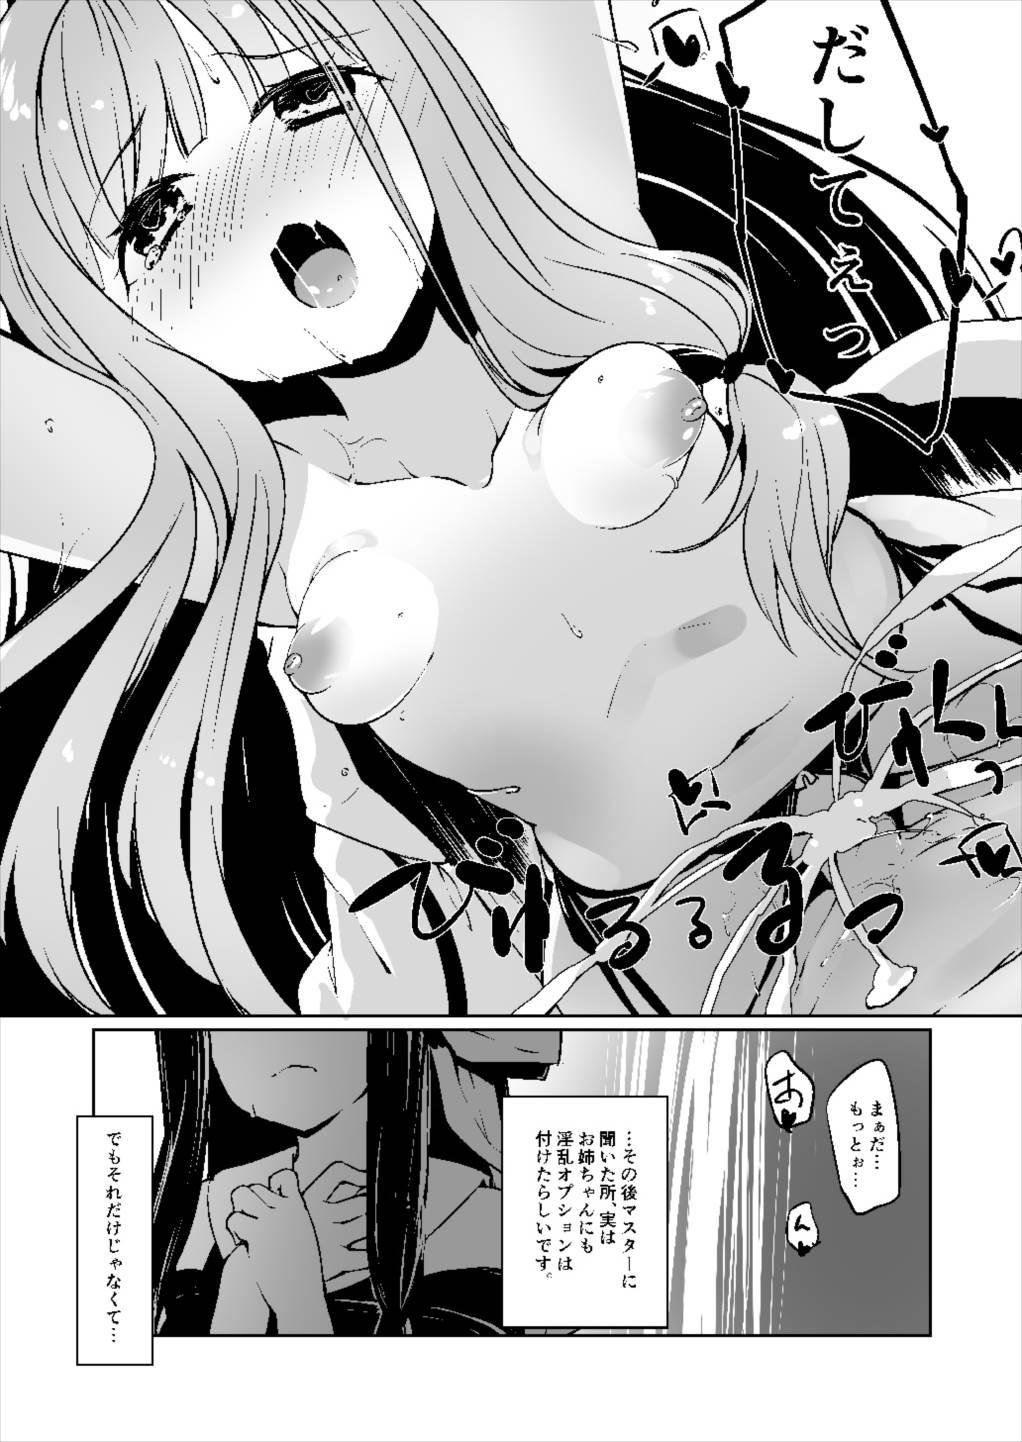 Tits コトノハラバーズ VOL.06 【お姉ちゃん観察日記】 - Vocaloid Voiceroid Asshole - Page 7